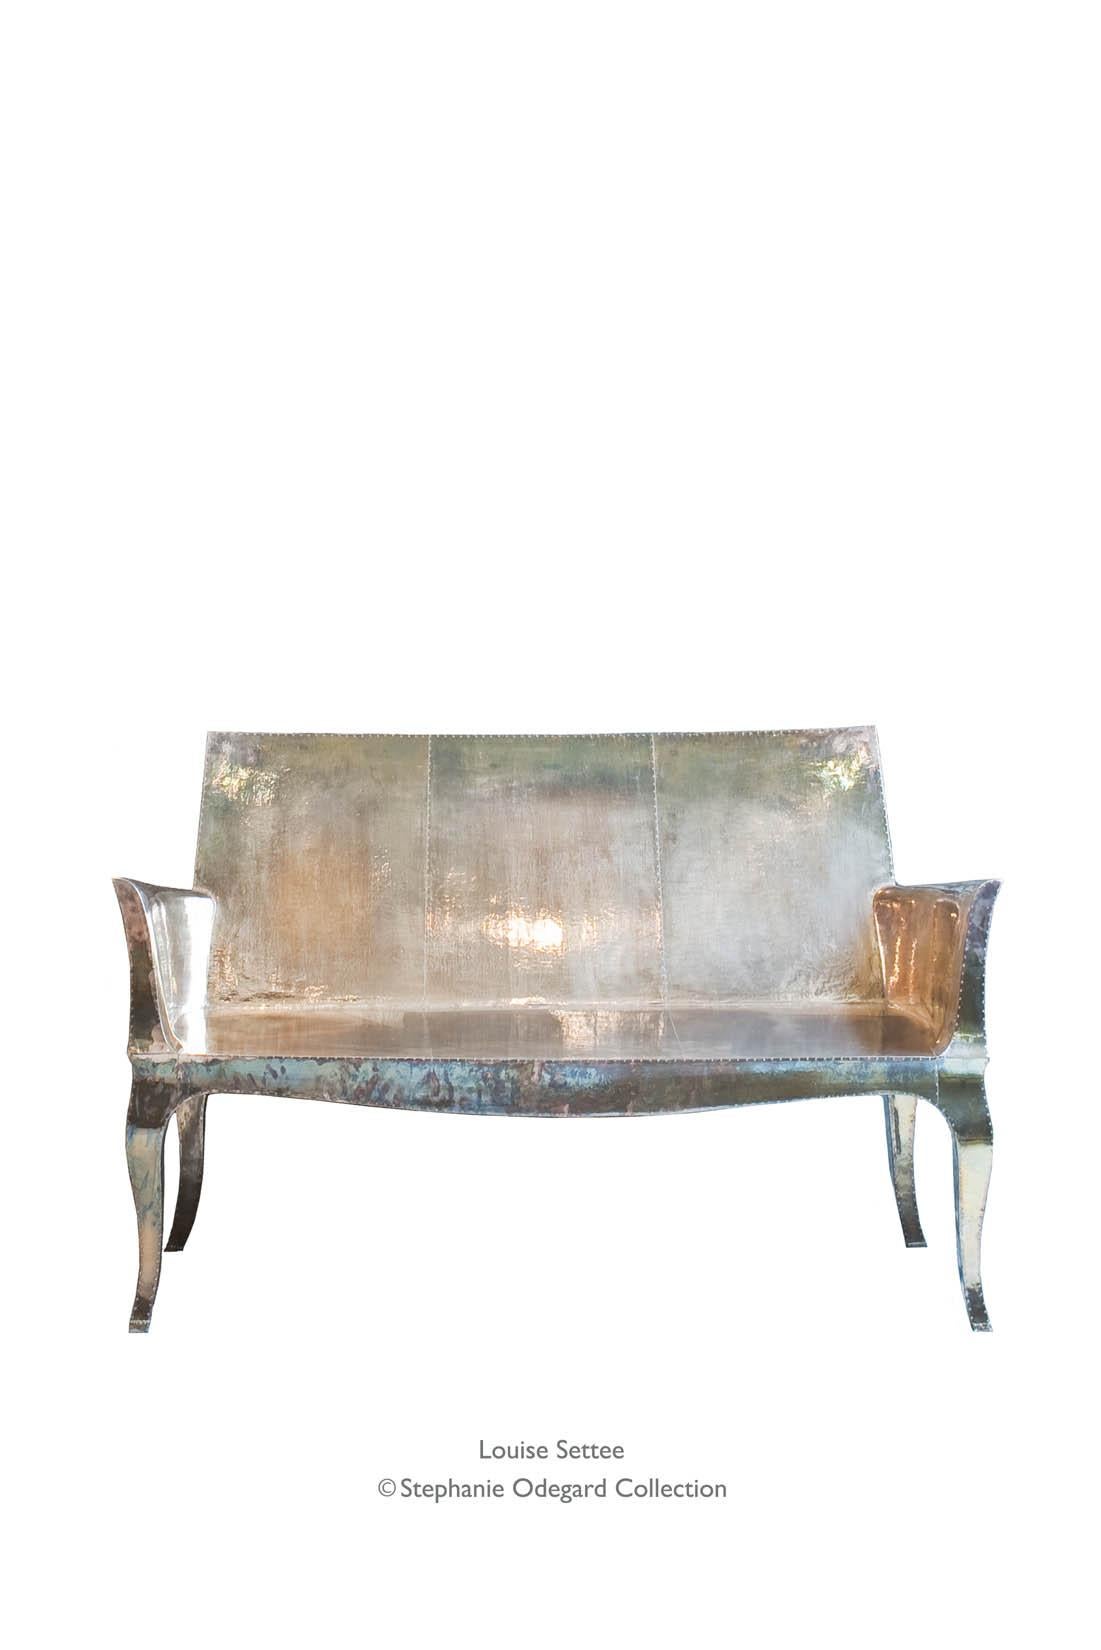 Louise Settee Art Deco Loveseats in Fine Hammered Copper by Paul Mathieu For Sale 6